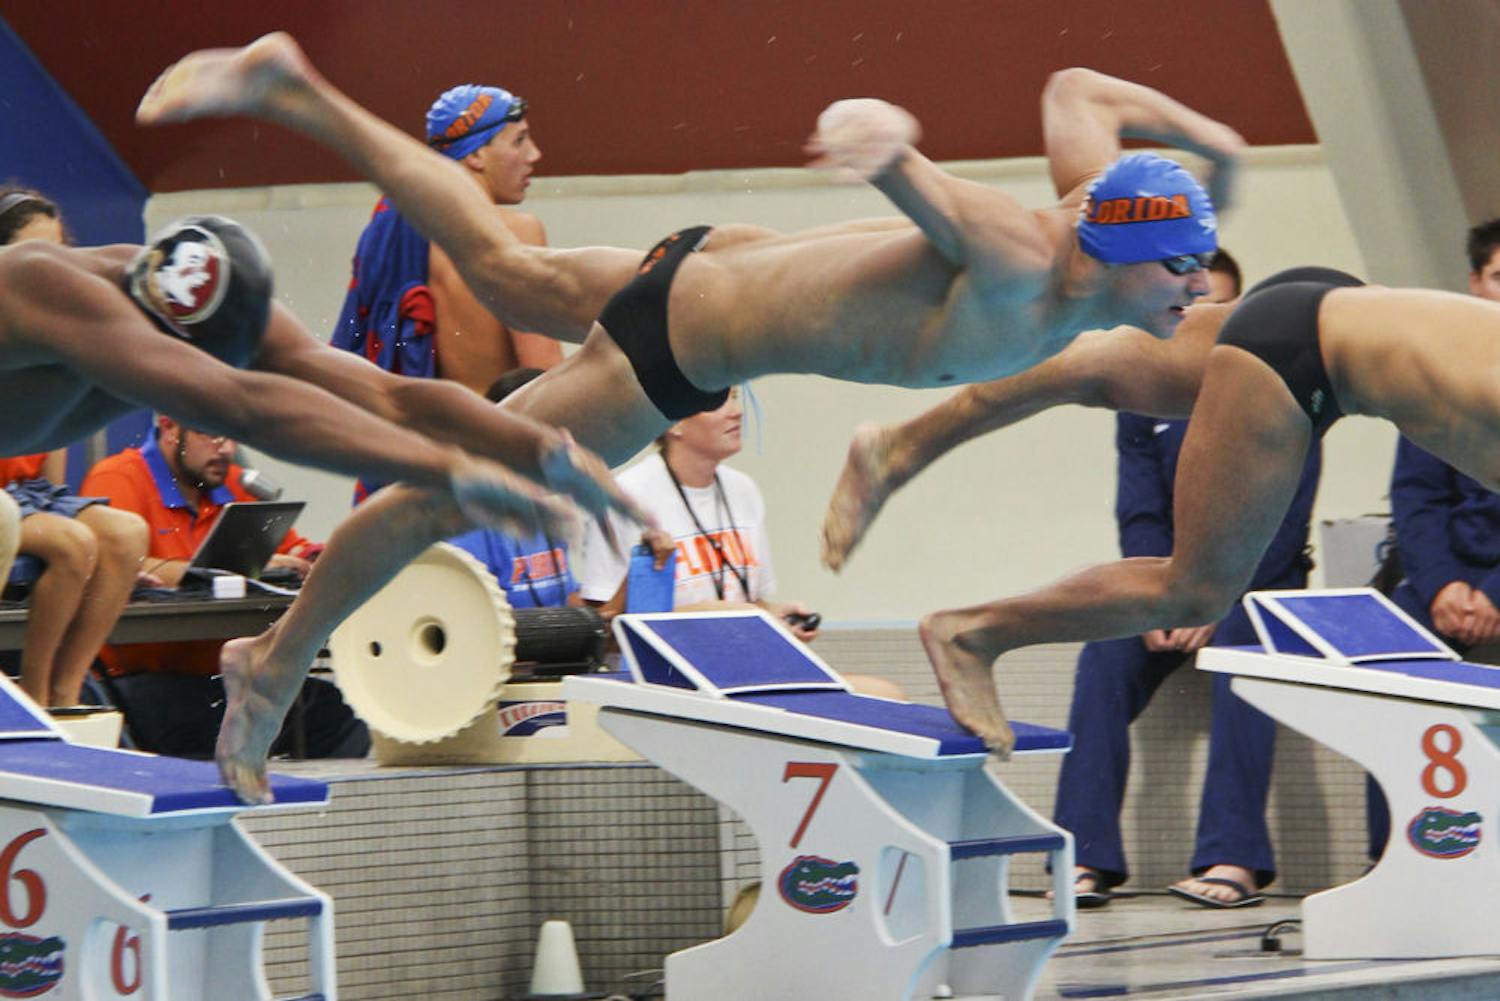 Freshman Caeleb Dressel jumps into the pool at the start of the 200-yard breaststroke event during Day 3 of the 2014 Pinch A Penny Invitational